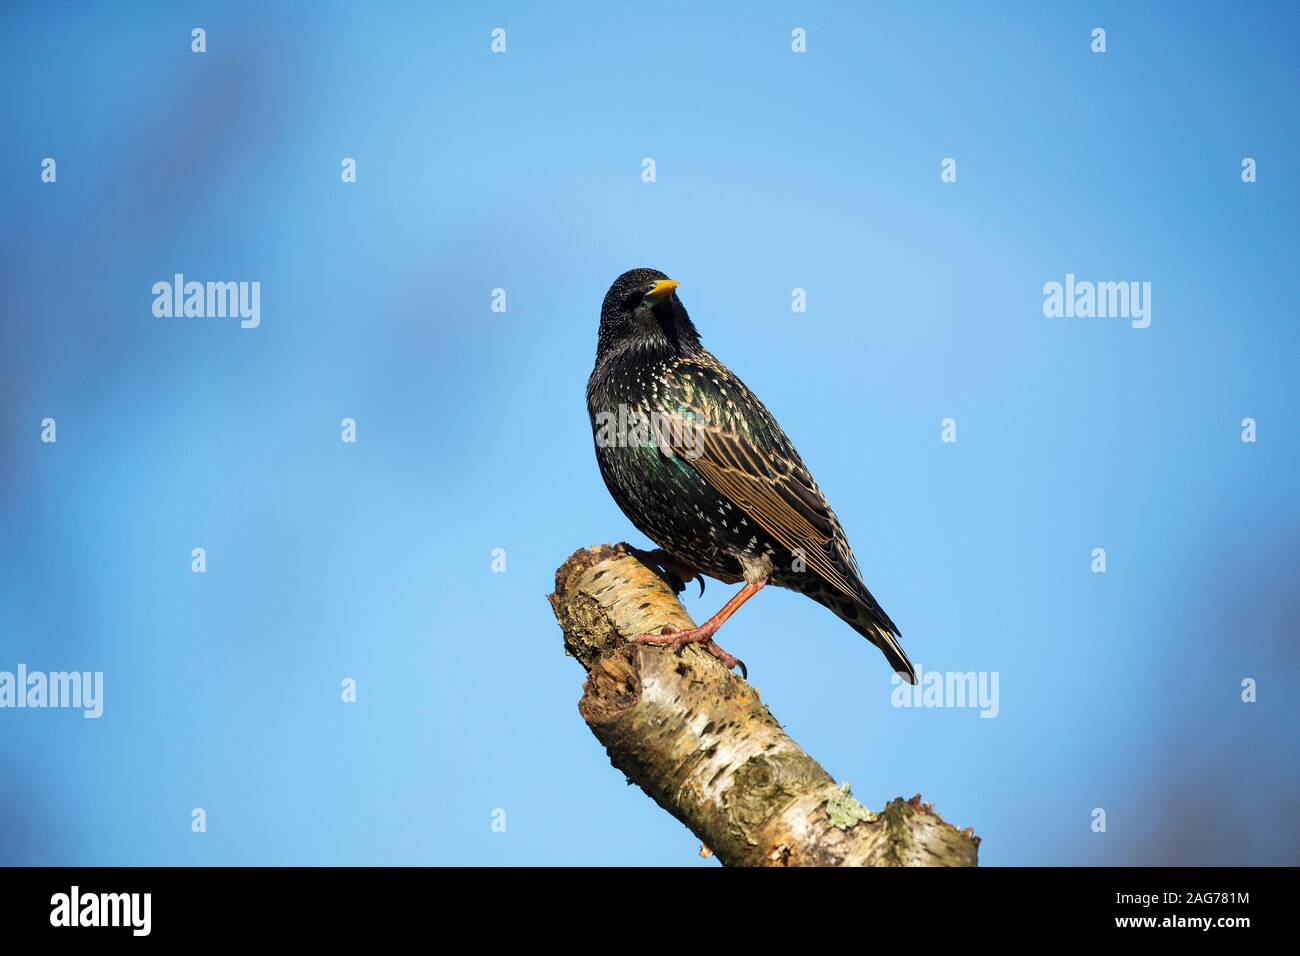 Common starling Sturnus vulgaris male perched on Silver birch Betula pendula branch in a garden, Crow, Ringwood, Hampshire, England, UK, March 2018 Stock Photo